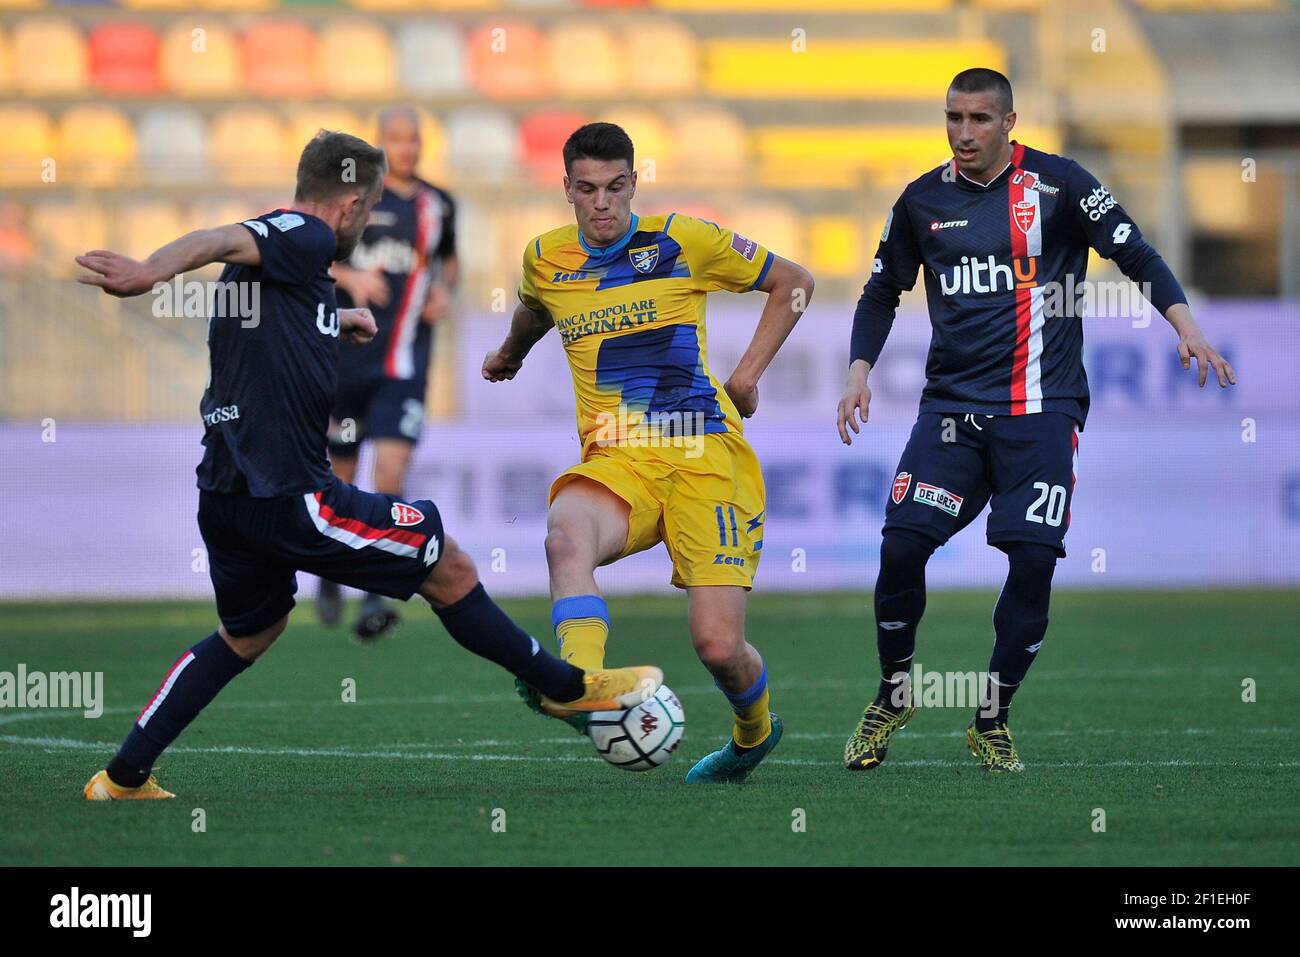 Daniel Boloca player of Frosinone, during the match of the Italian Serie B championship, between Frosinon vs Monza, final result 2-2, match played at Stock Photo